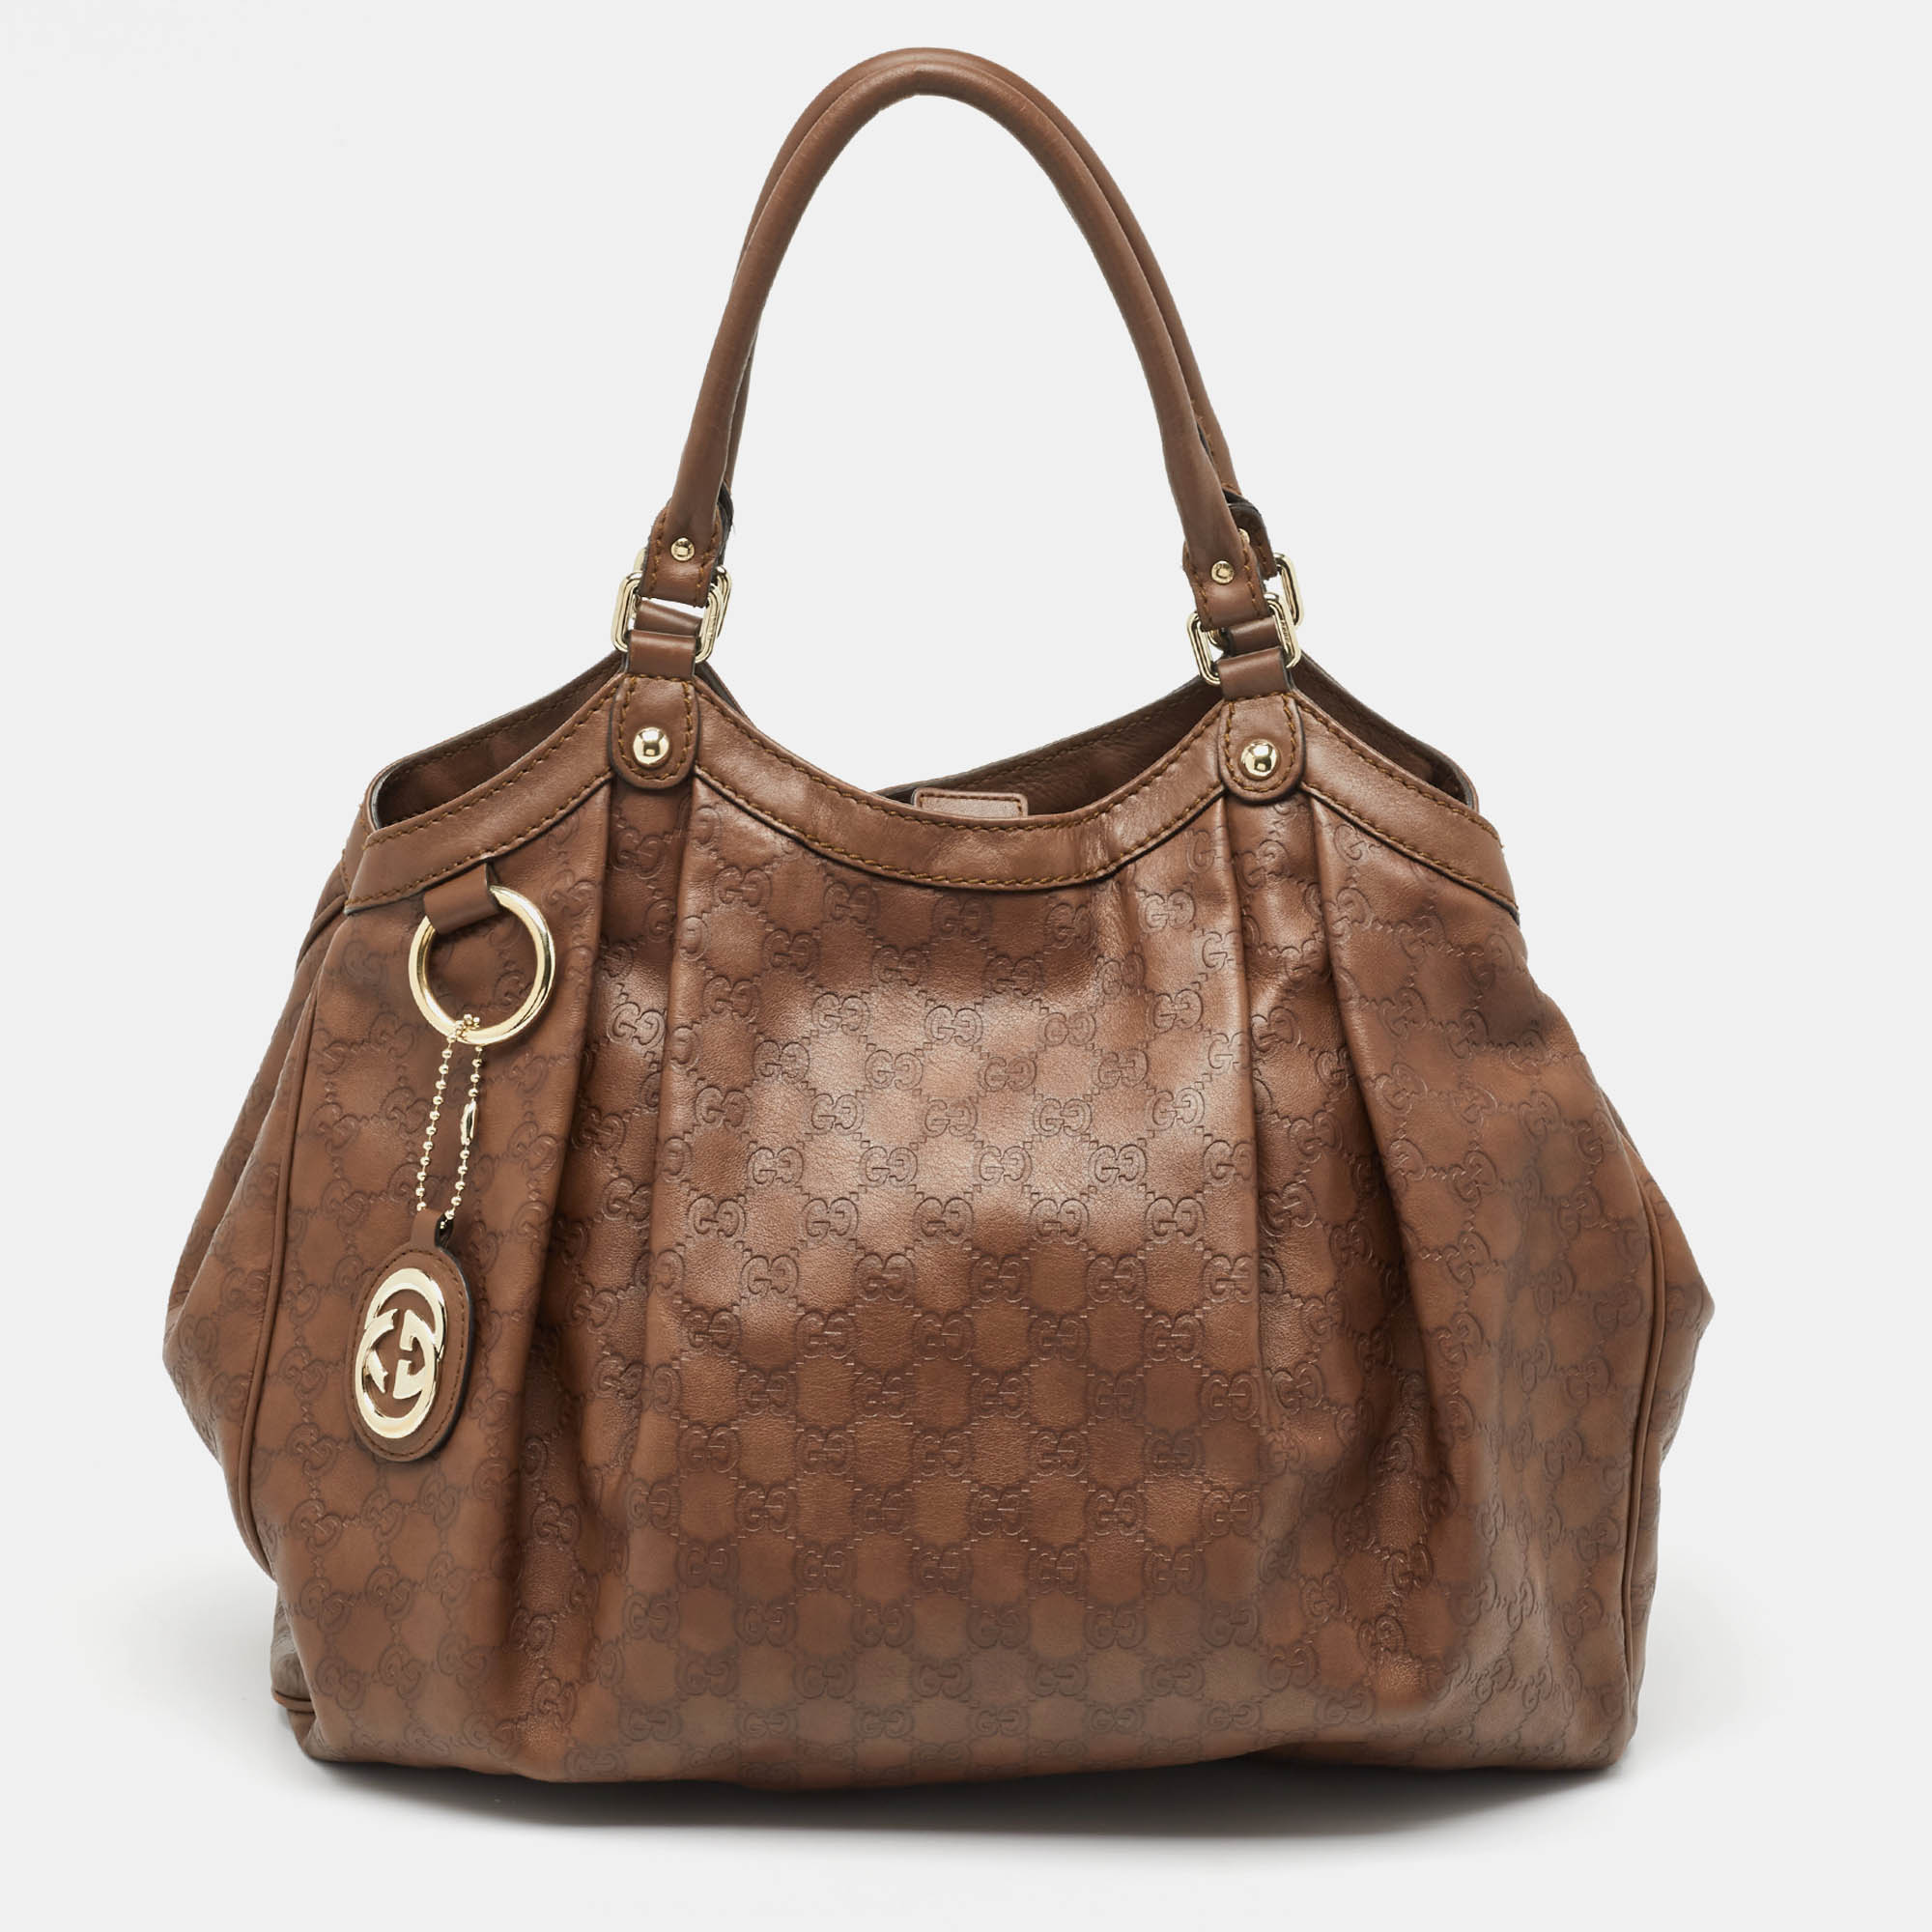 Enriched with signature details this Sukey tote from Gucci will impress with its charming and elegant appeal. It comes crafted from Guccissima leather with top dual handles a branded charm and gold tone hardware. Lined with fabric its spacious interior makes it an ideal everyday accessory.